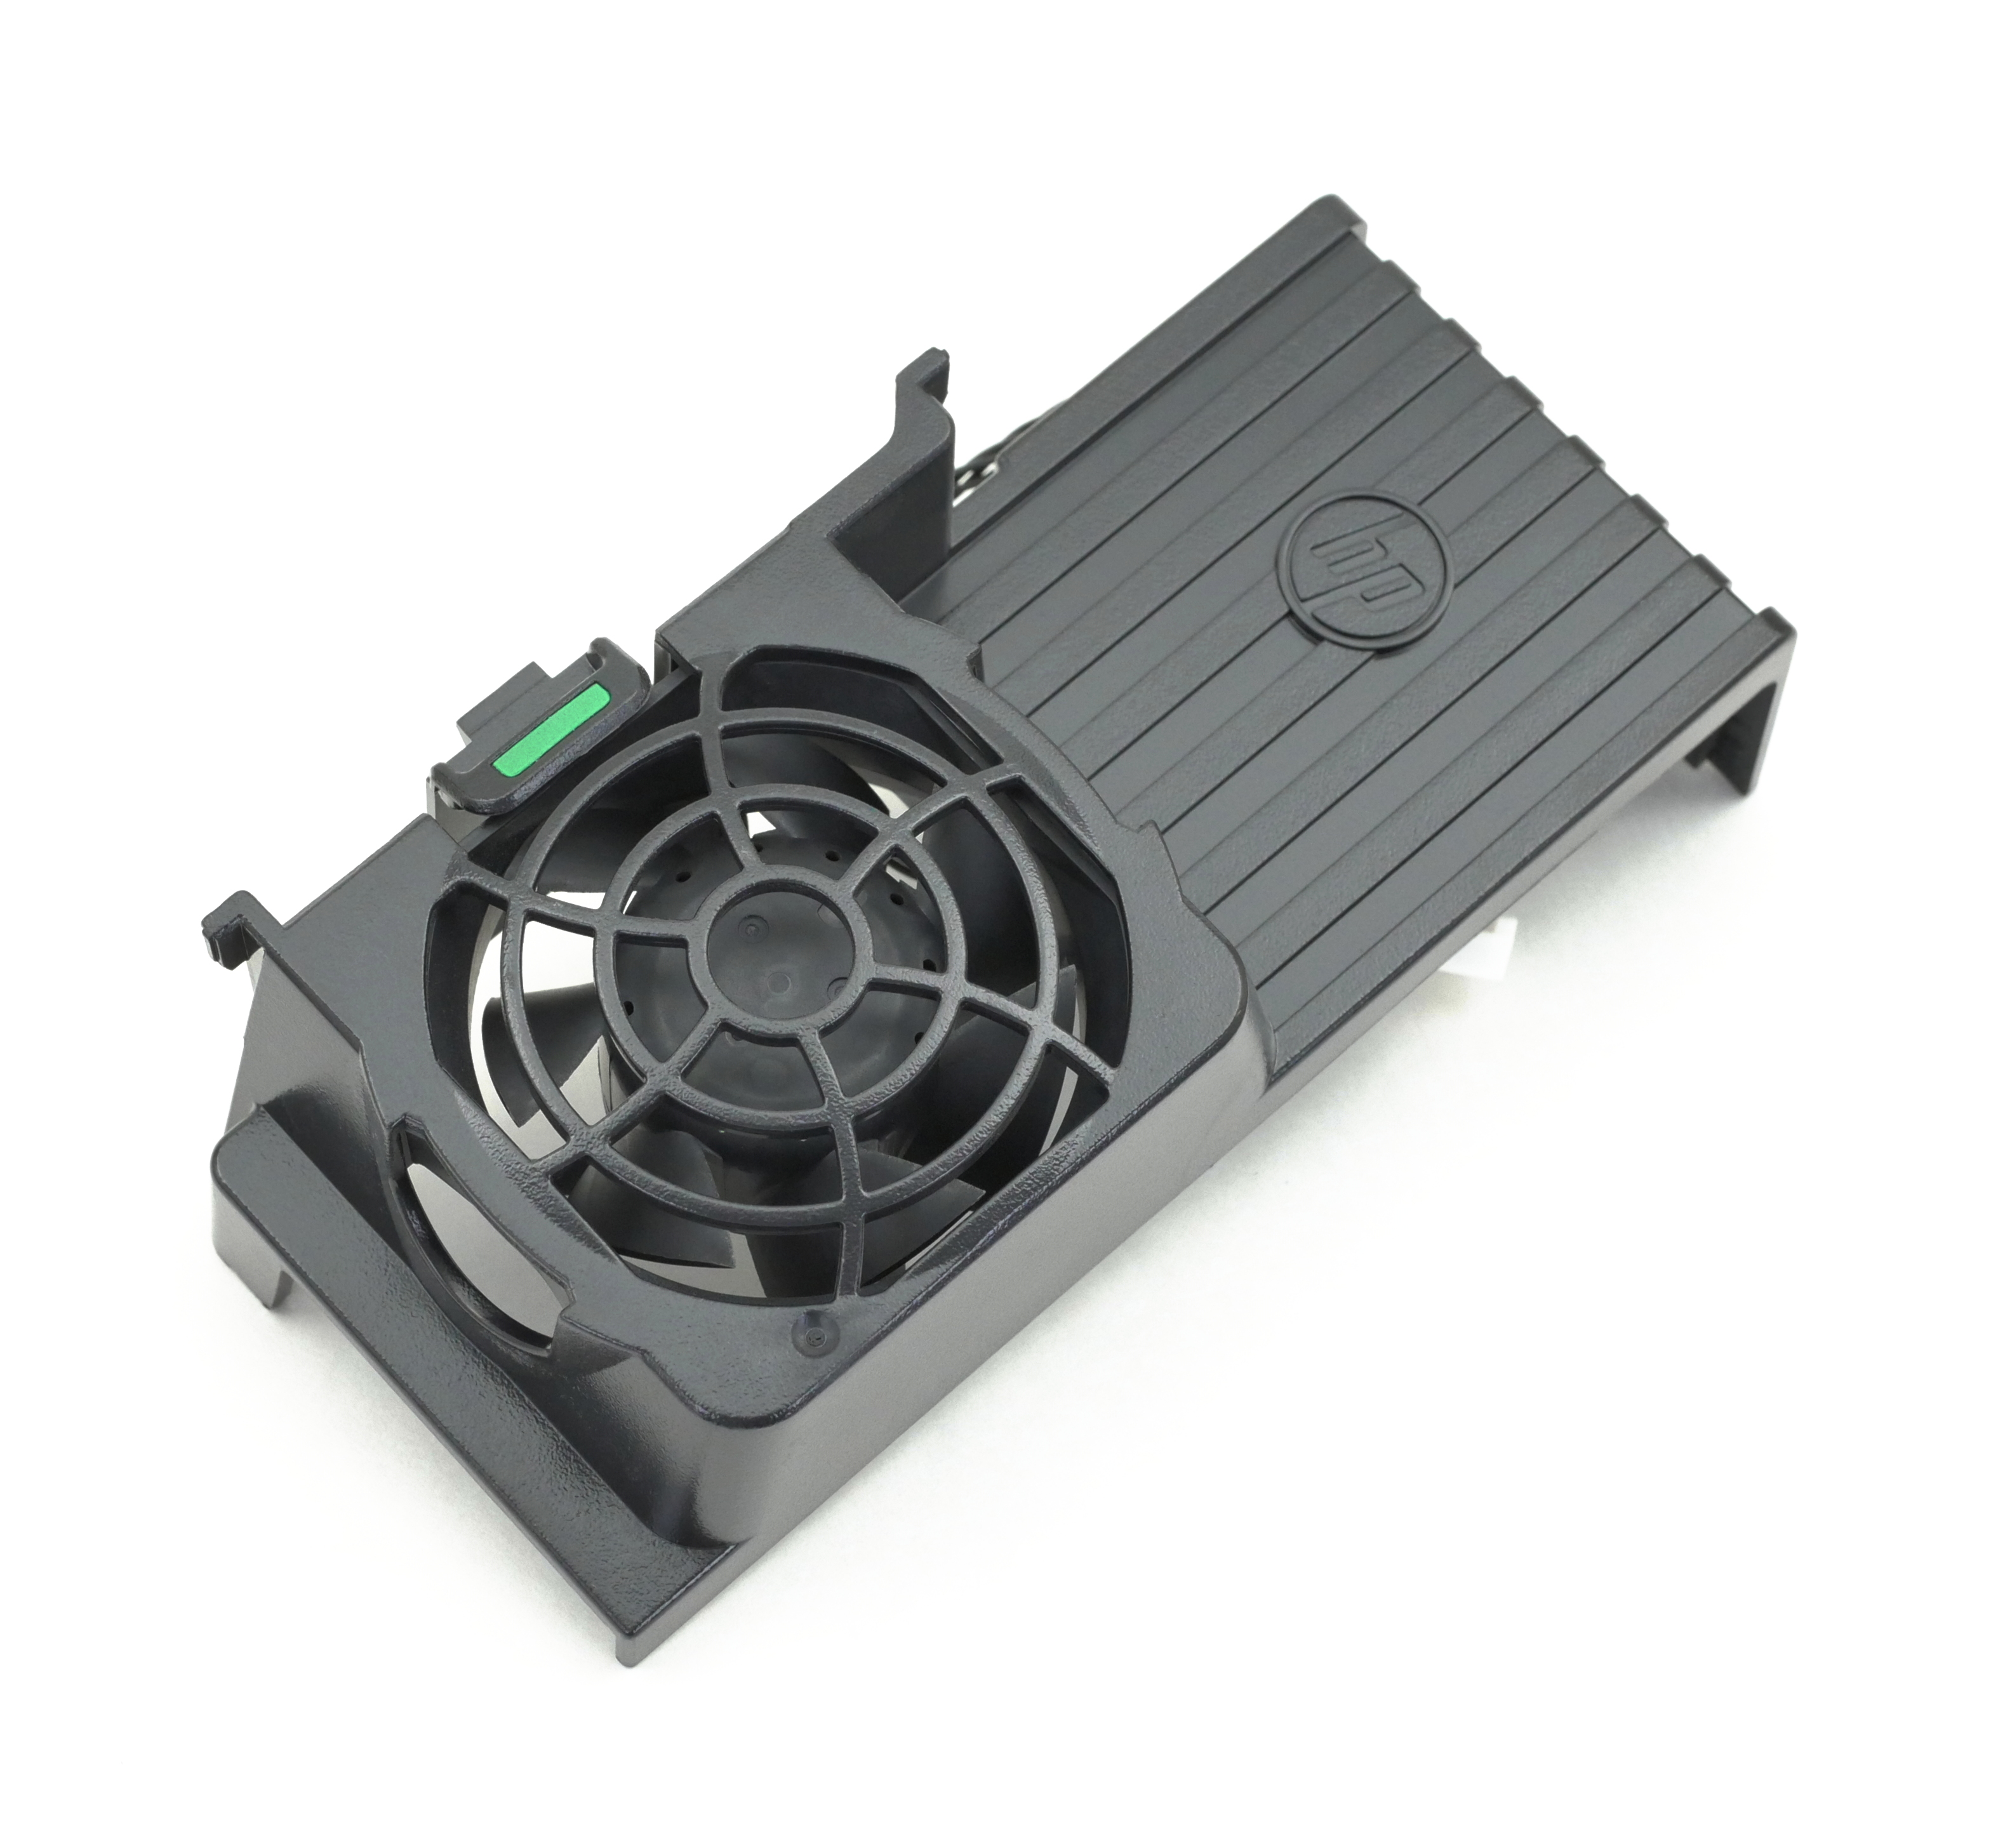 HP Z420 Workstation Memory Cover Cooling Assembly Fan 647293-001 663069-001